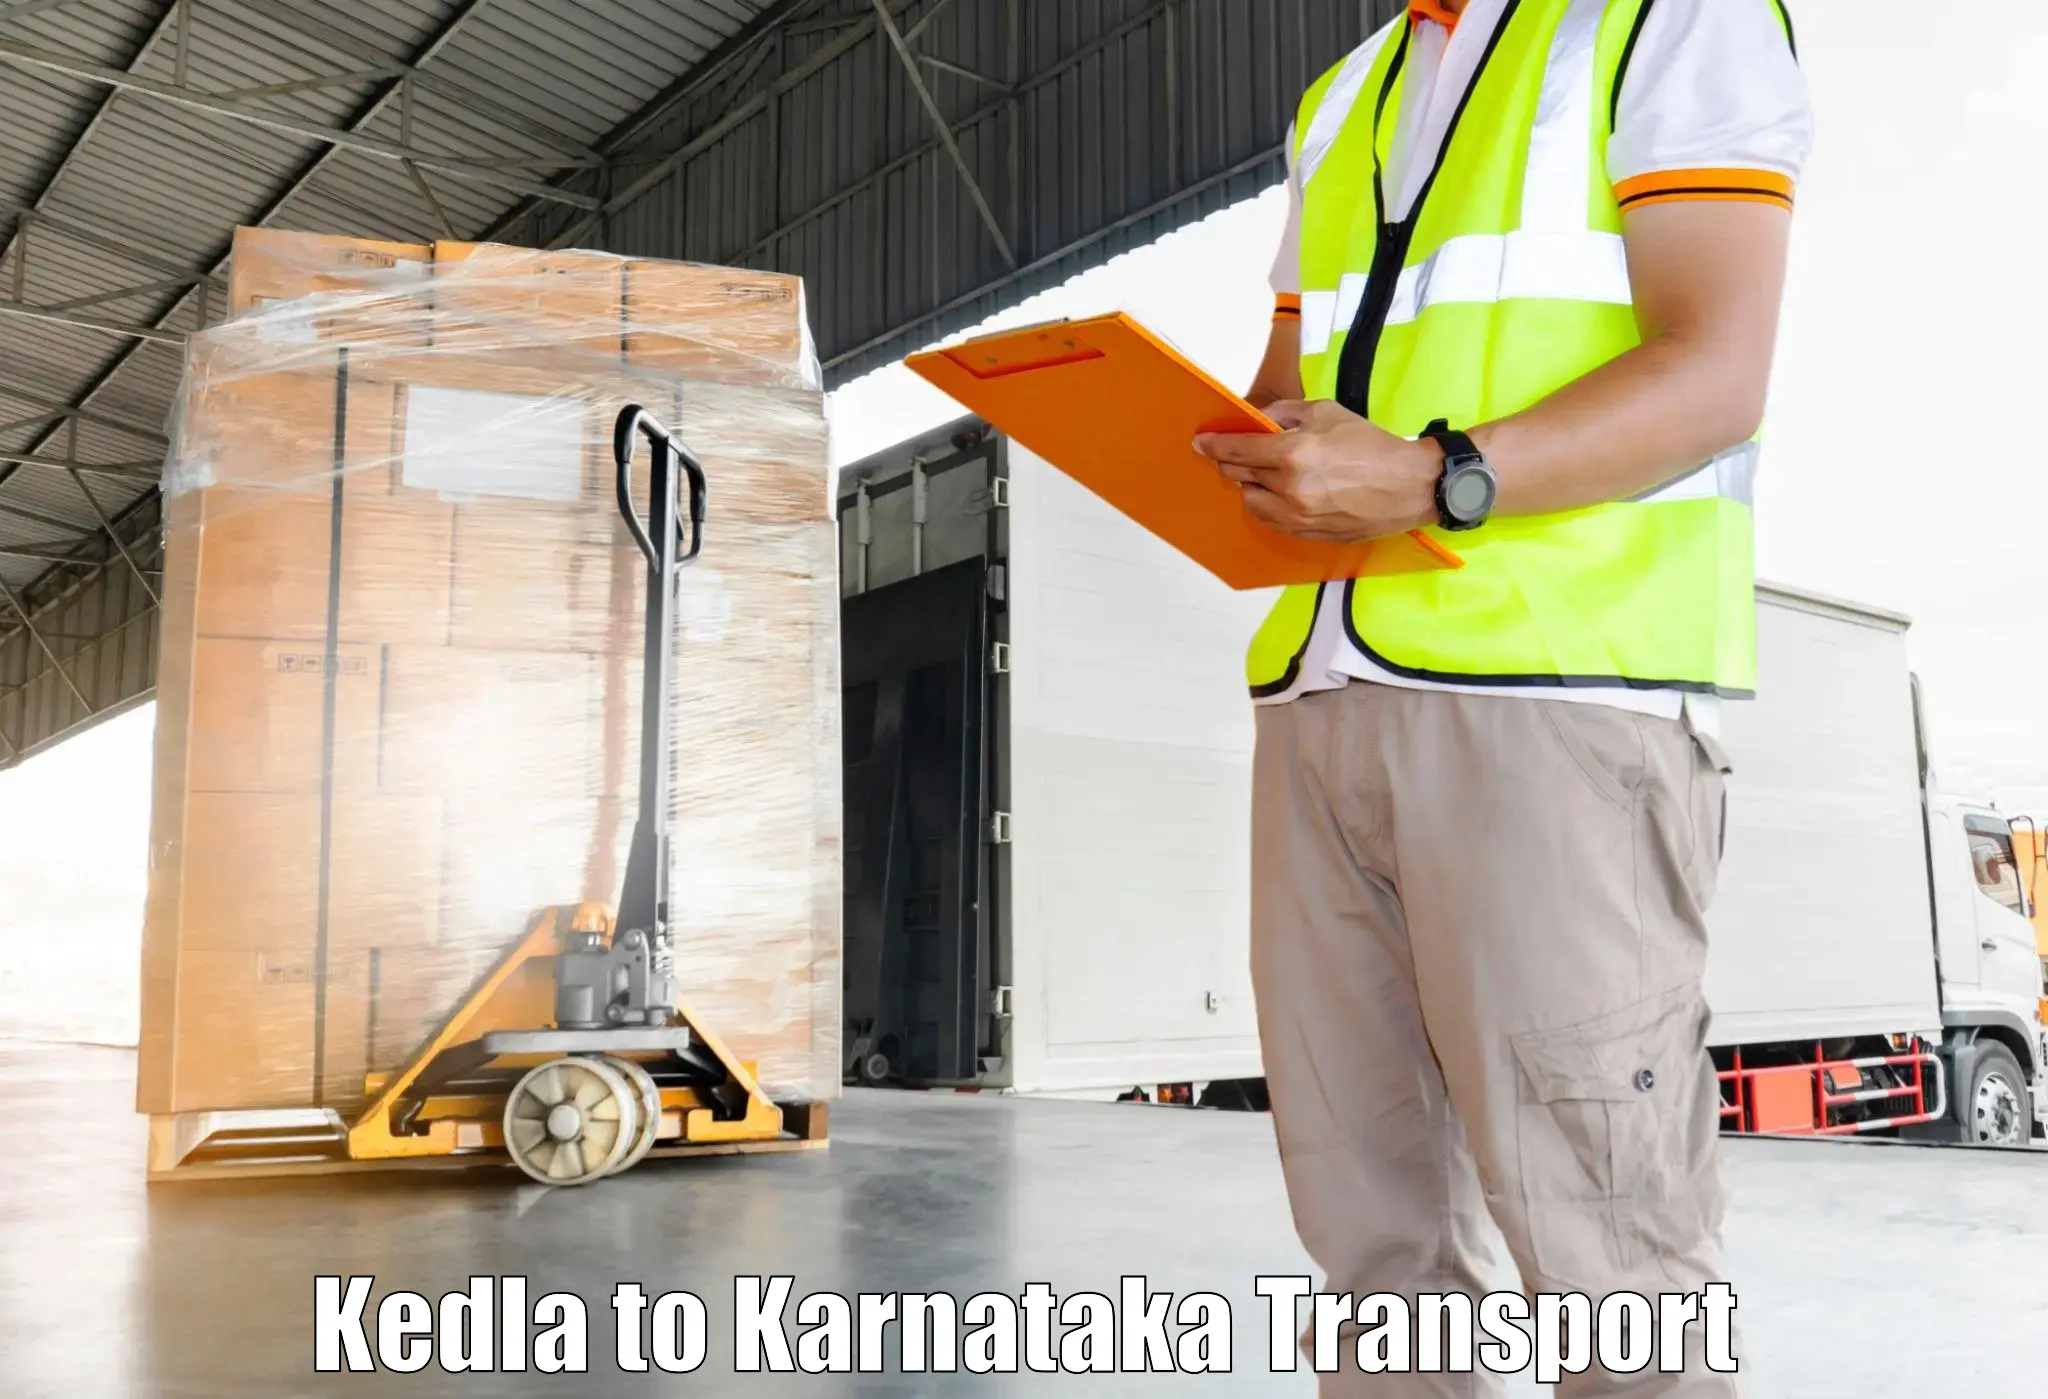 Two wheeler transport services Kedla to Byndoor